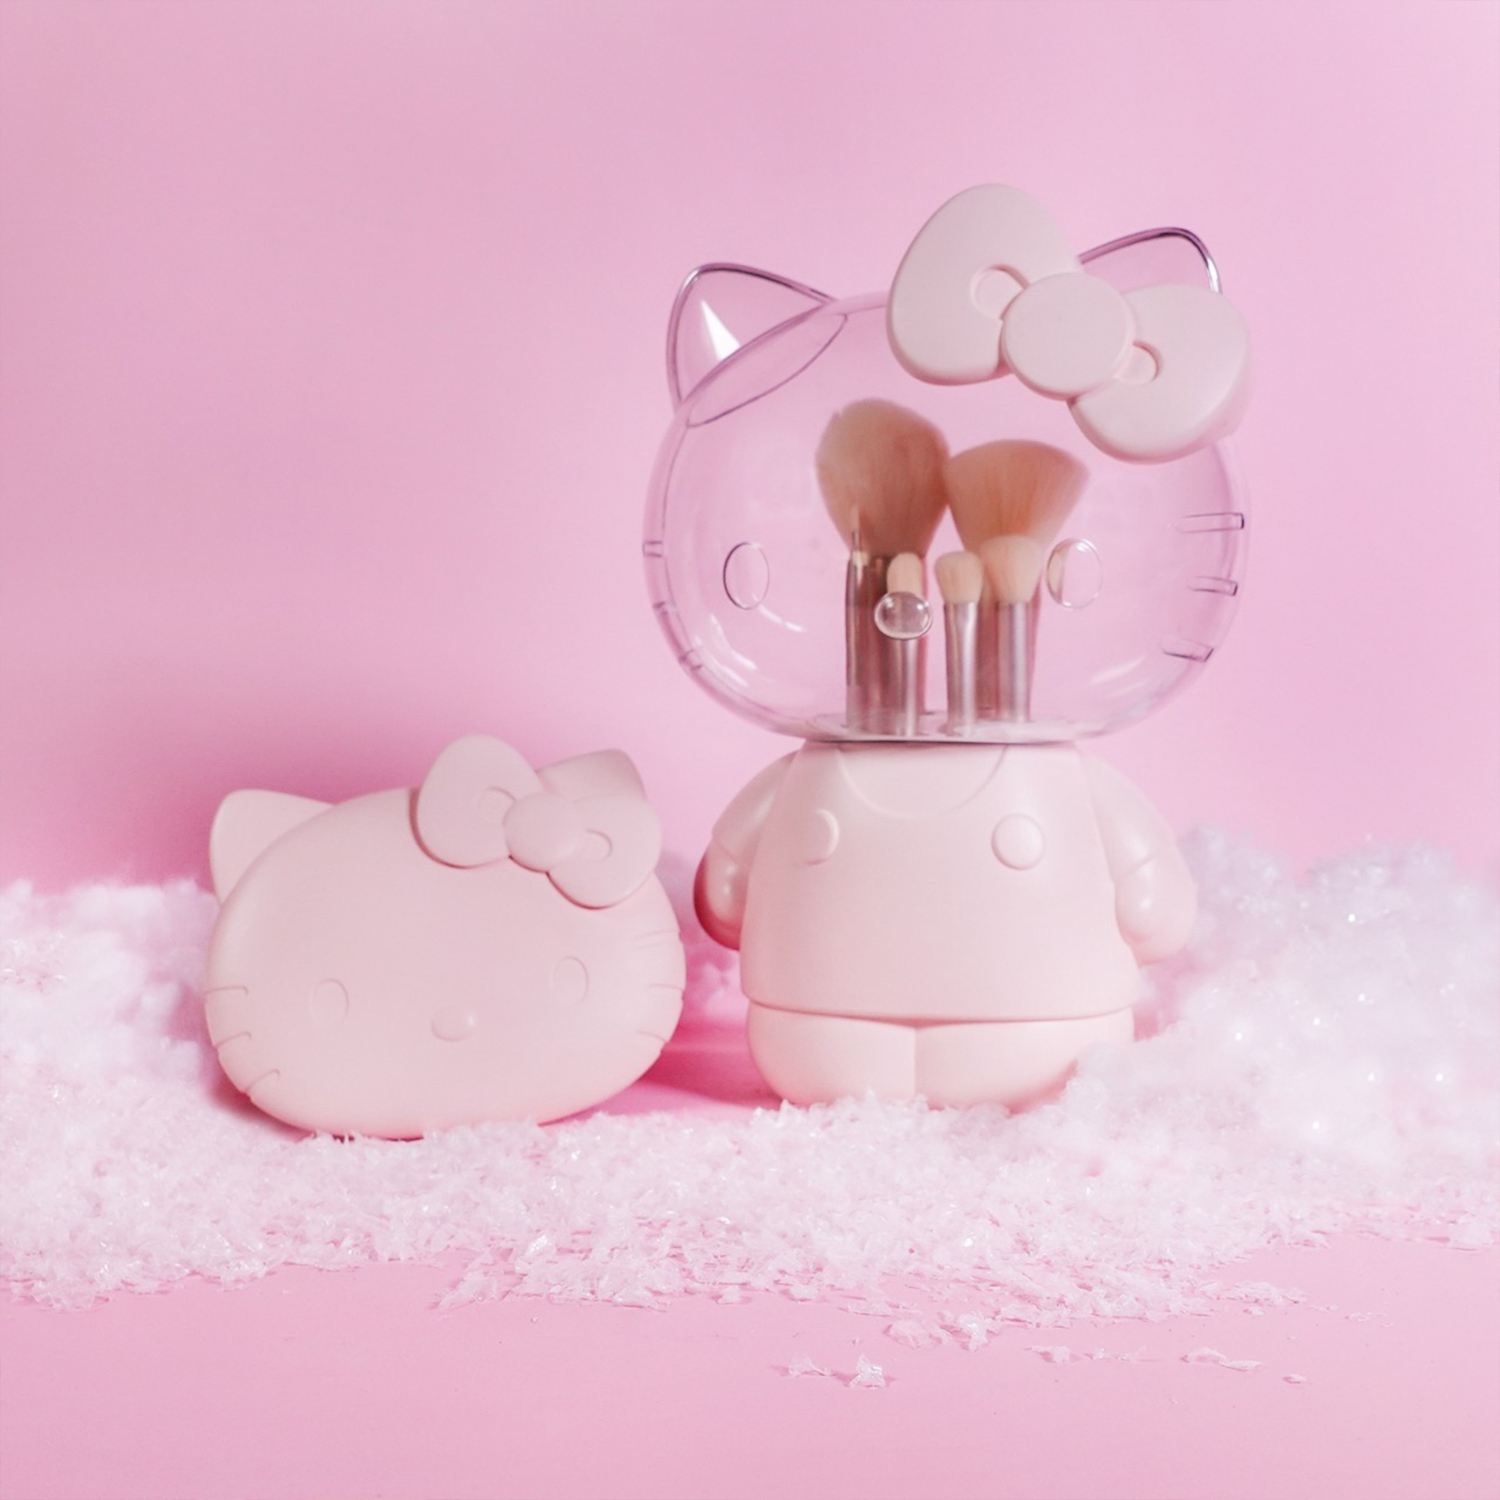 Impressions Vanity Hello Kitty 6 Pcs Makeup Brush Set with Clear Cloche, Soft Makeup Brushes (Pink) - image 3 of 12